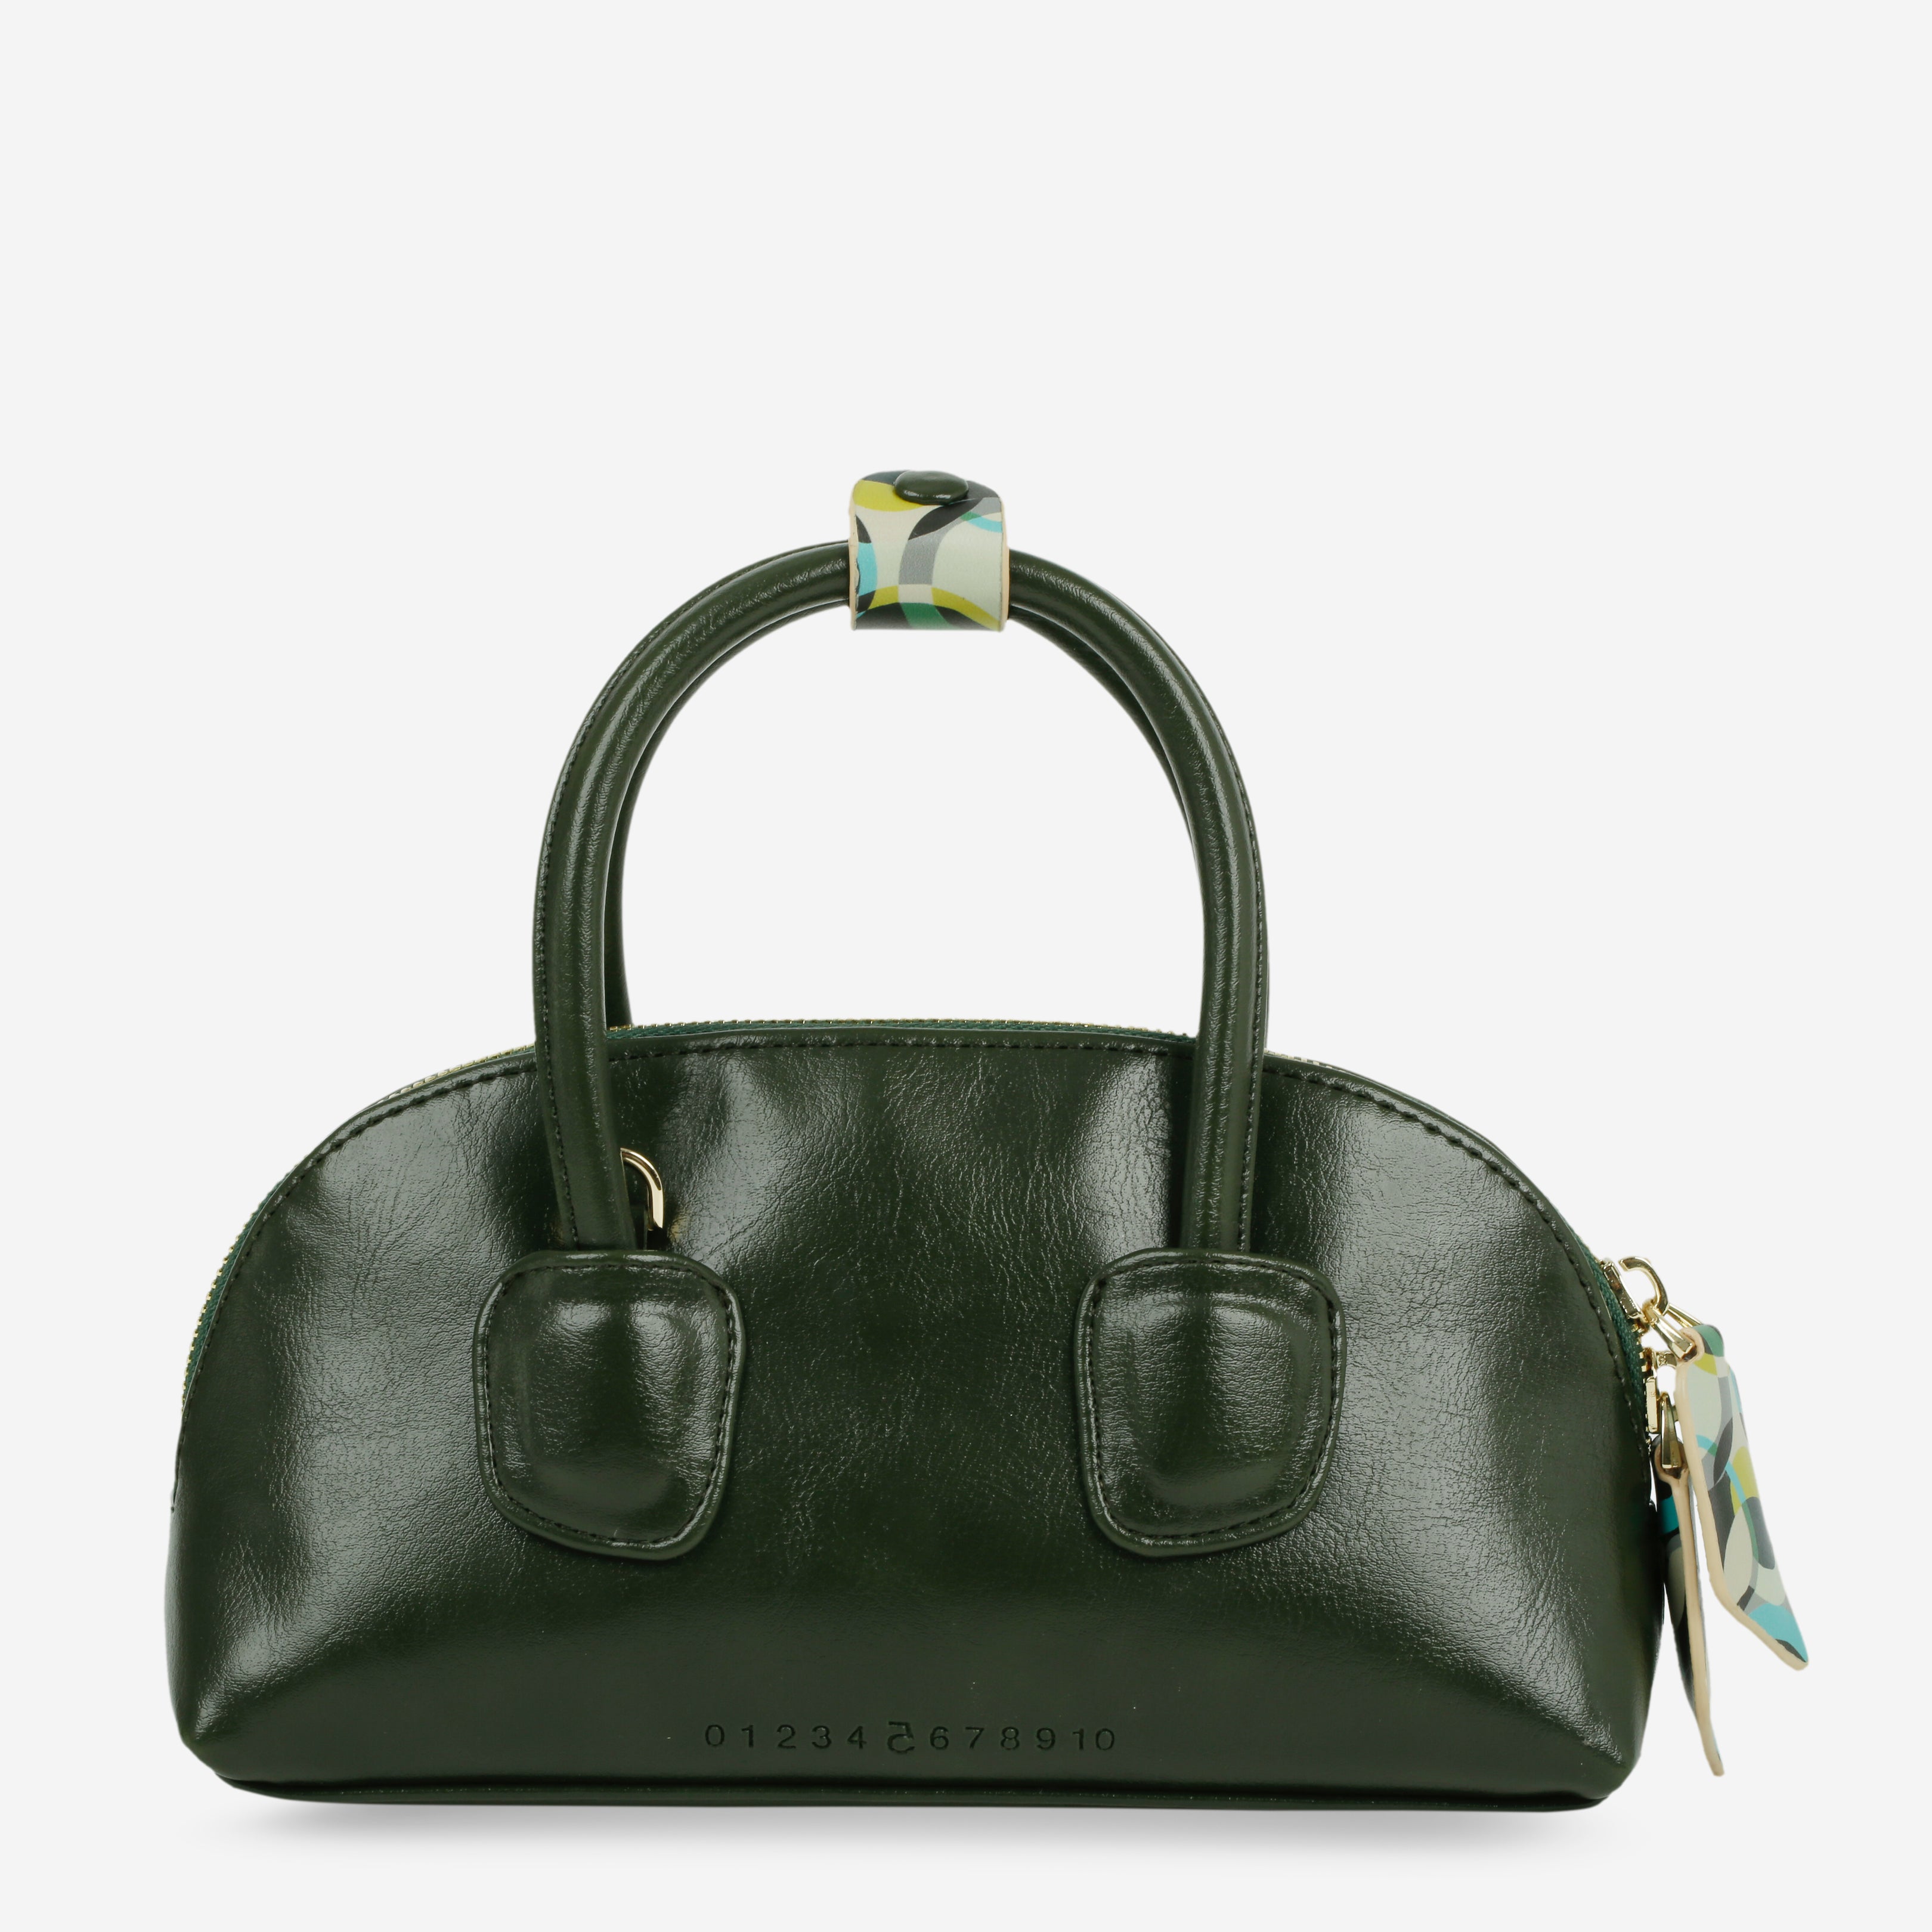 TACOS bag green black small size (S)